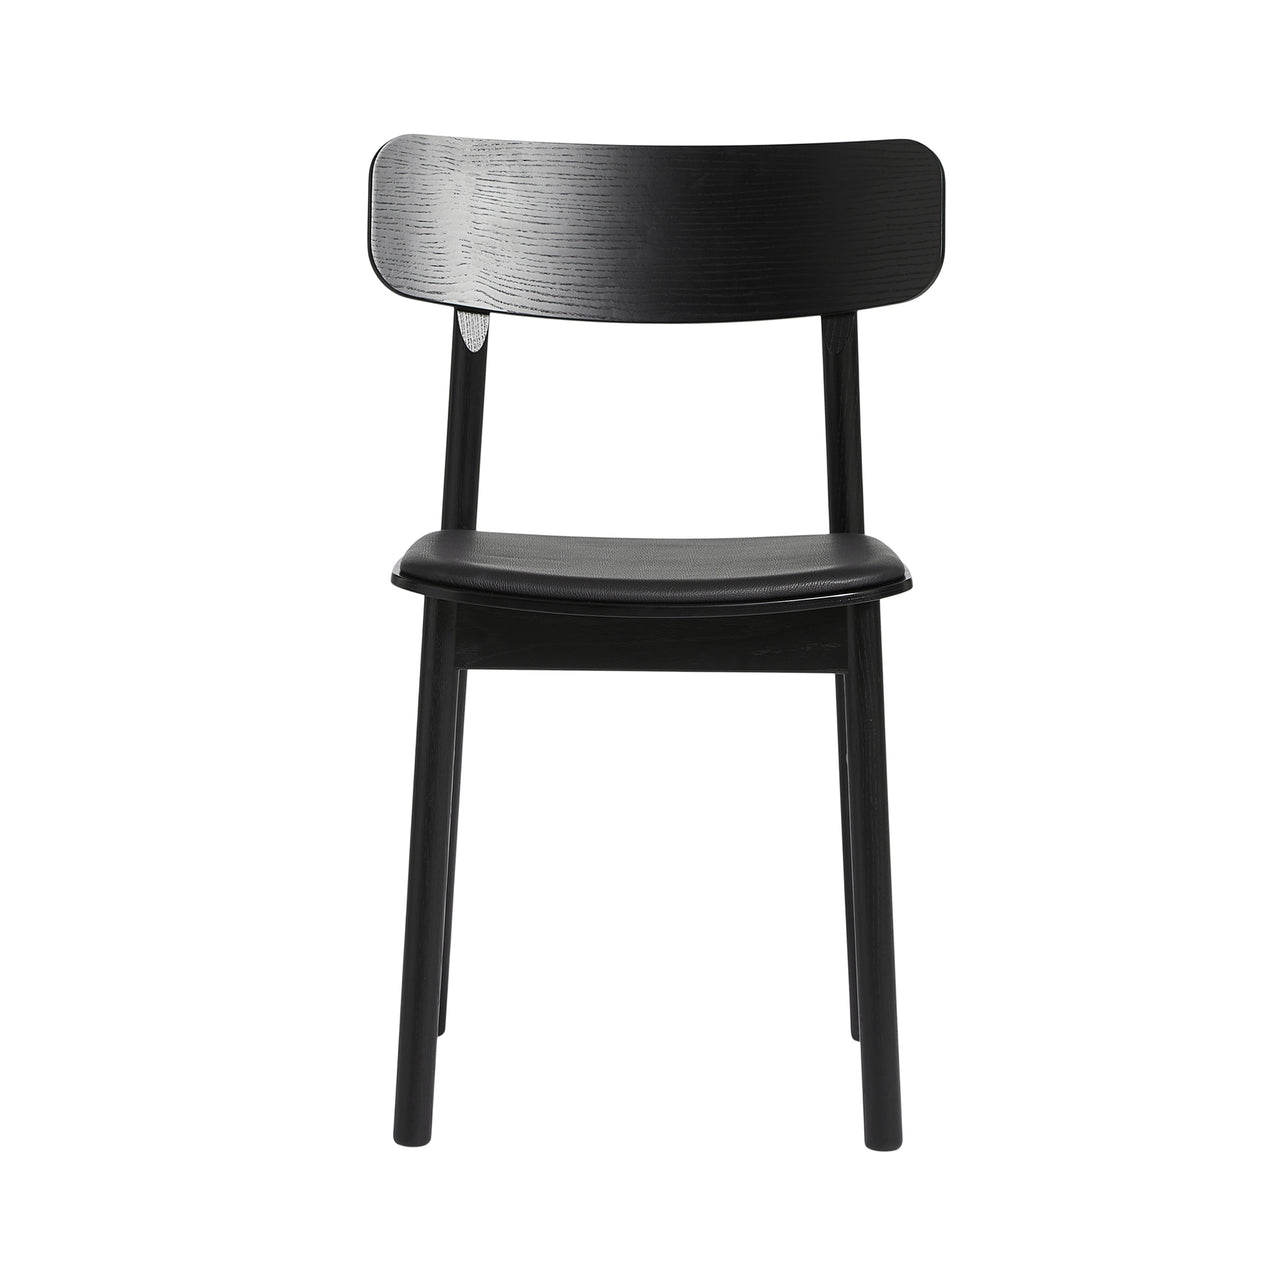 Soma Dining Chair: Black Painted Ash + With Black Seatpad